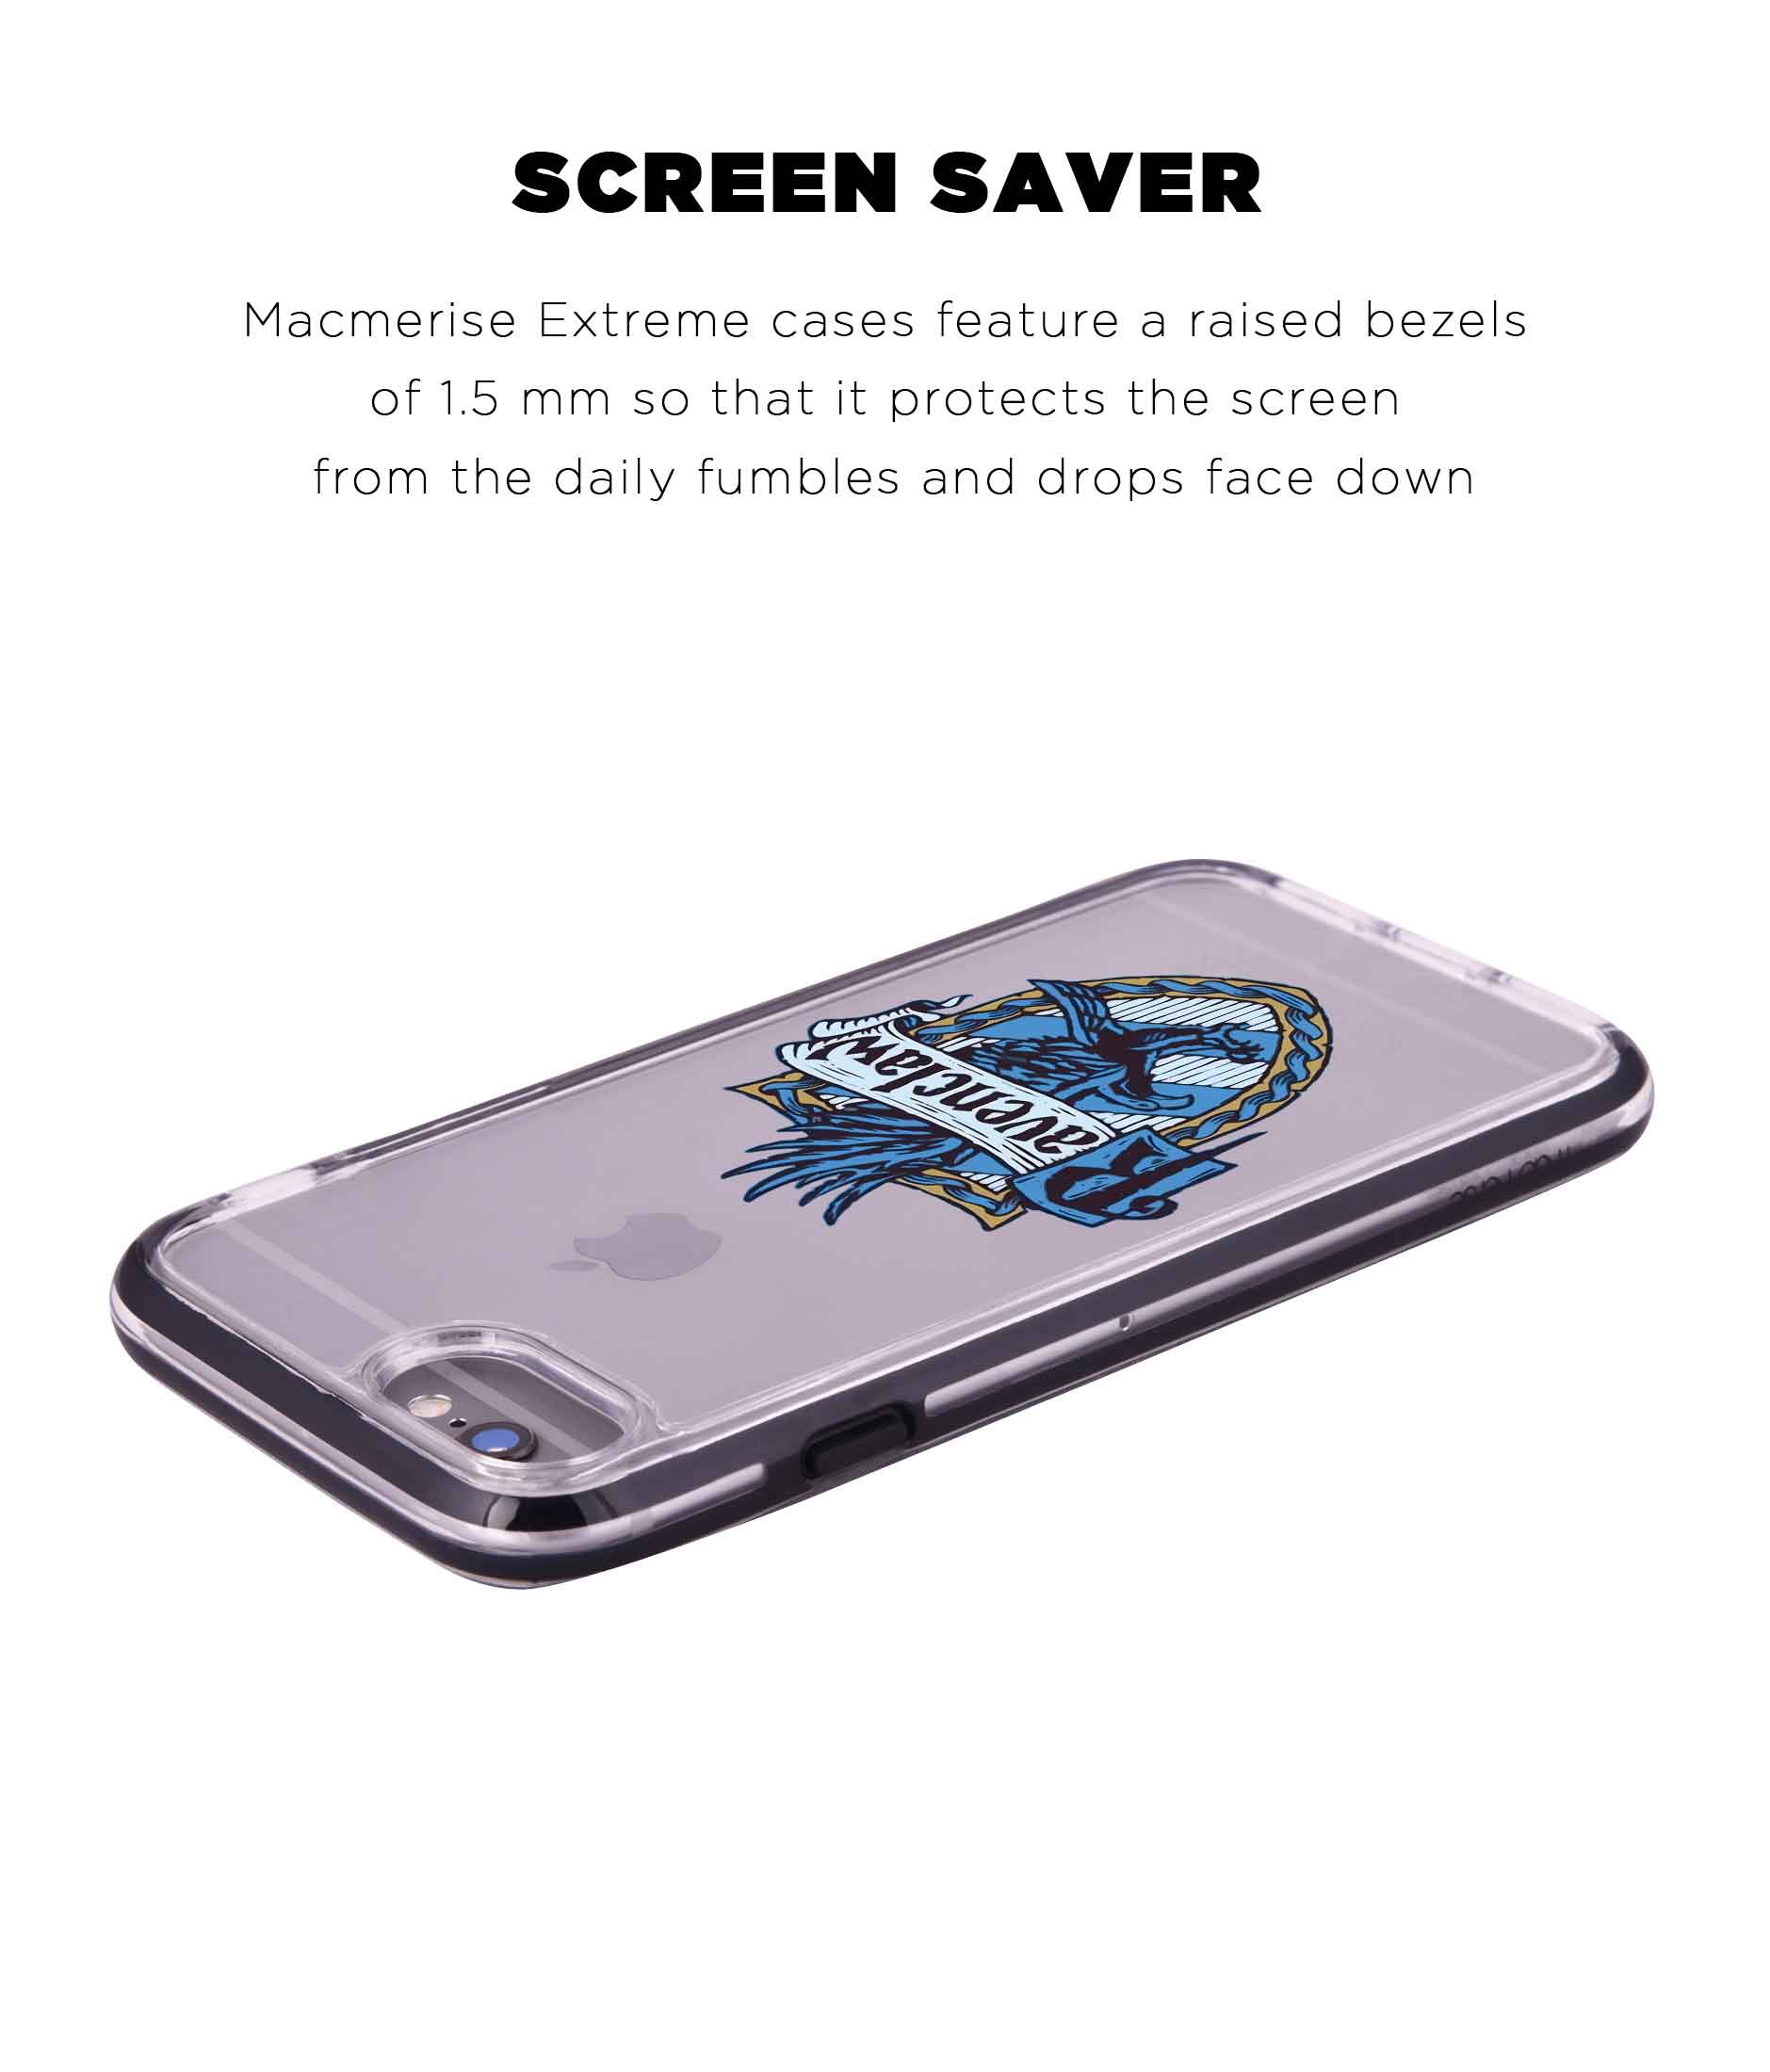 Crest Ravenclaw - Extreme Phone Case for iPhone 6